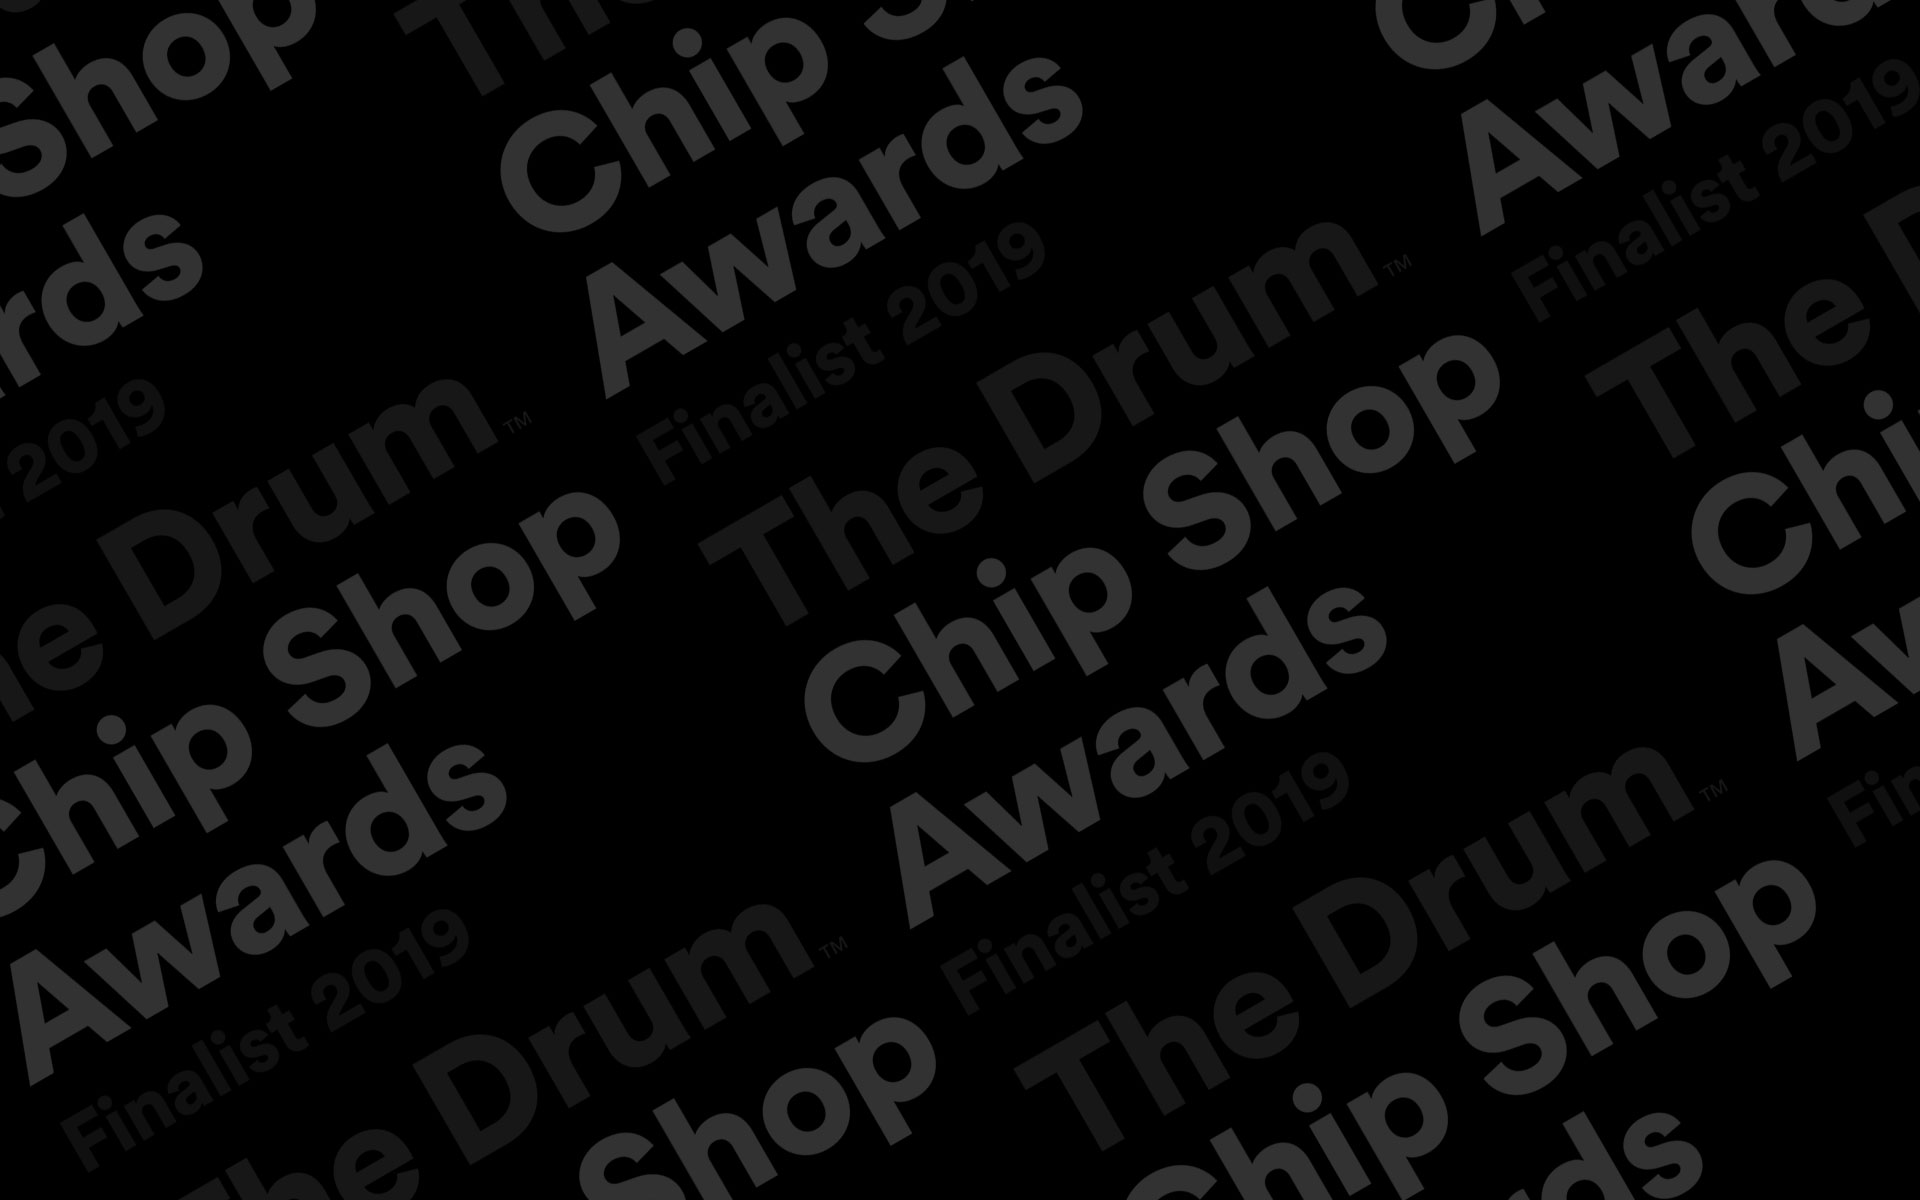 We’re nominated in 7 categories at The Chip Shop Awards by The Drum